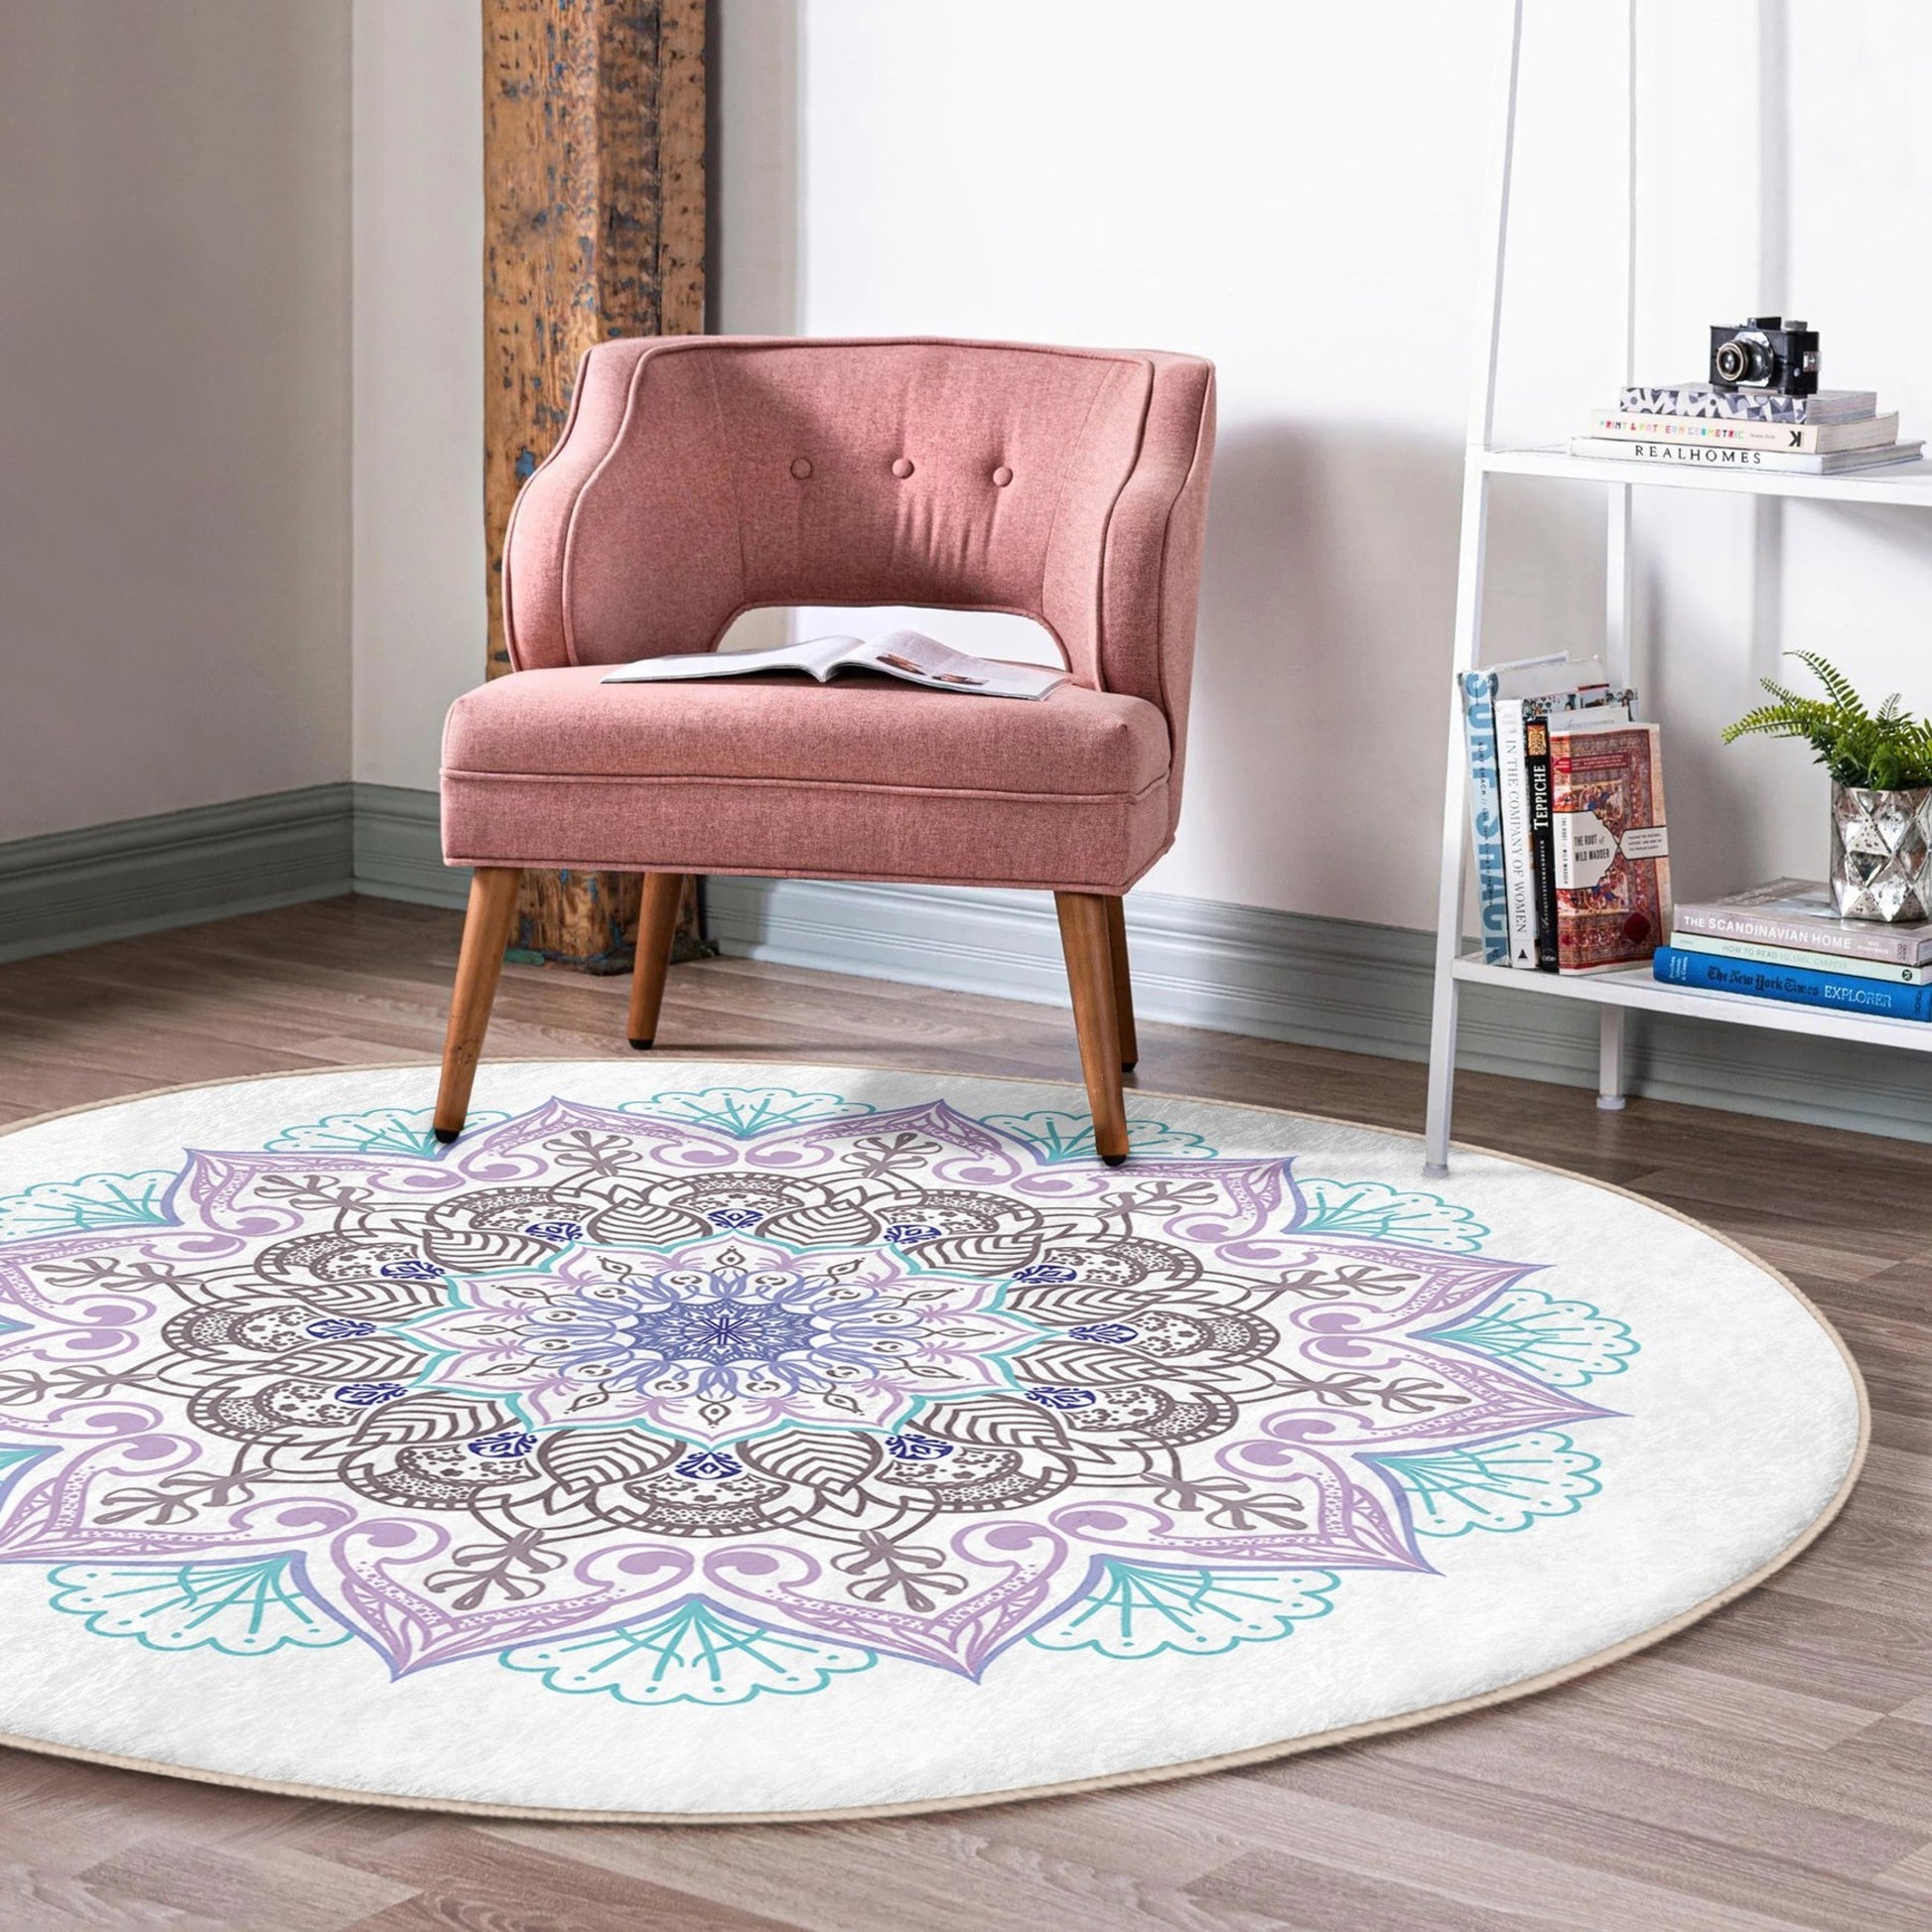 Round Patterned Floor Rug - Home Ambiance Accent